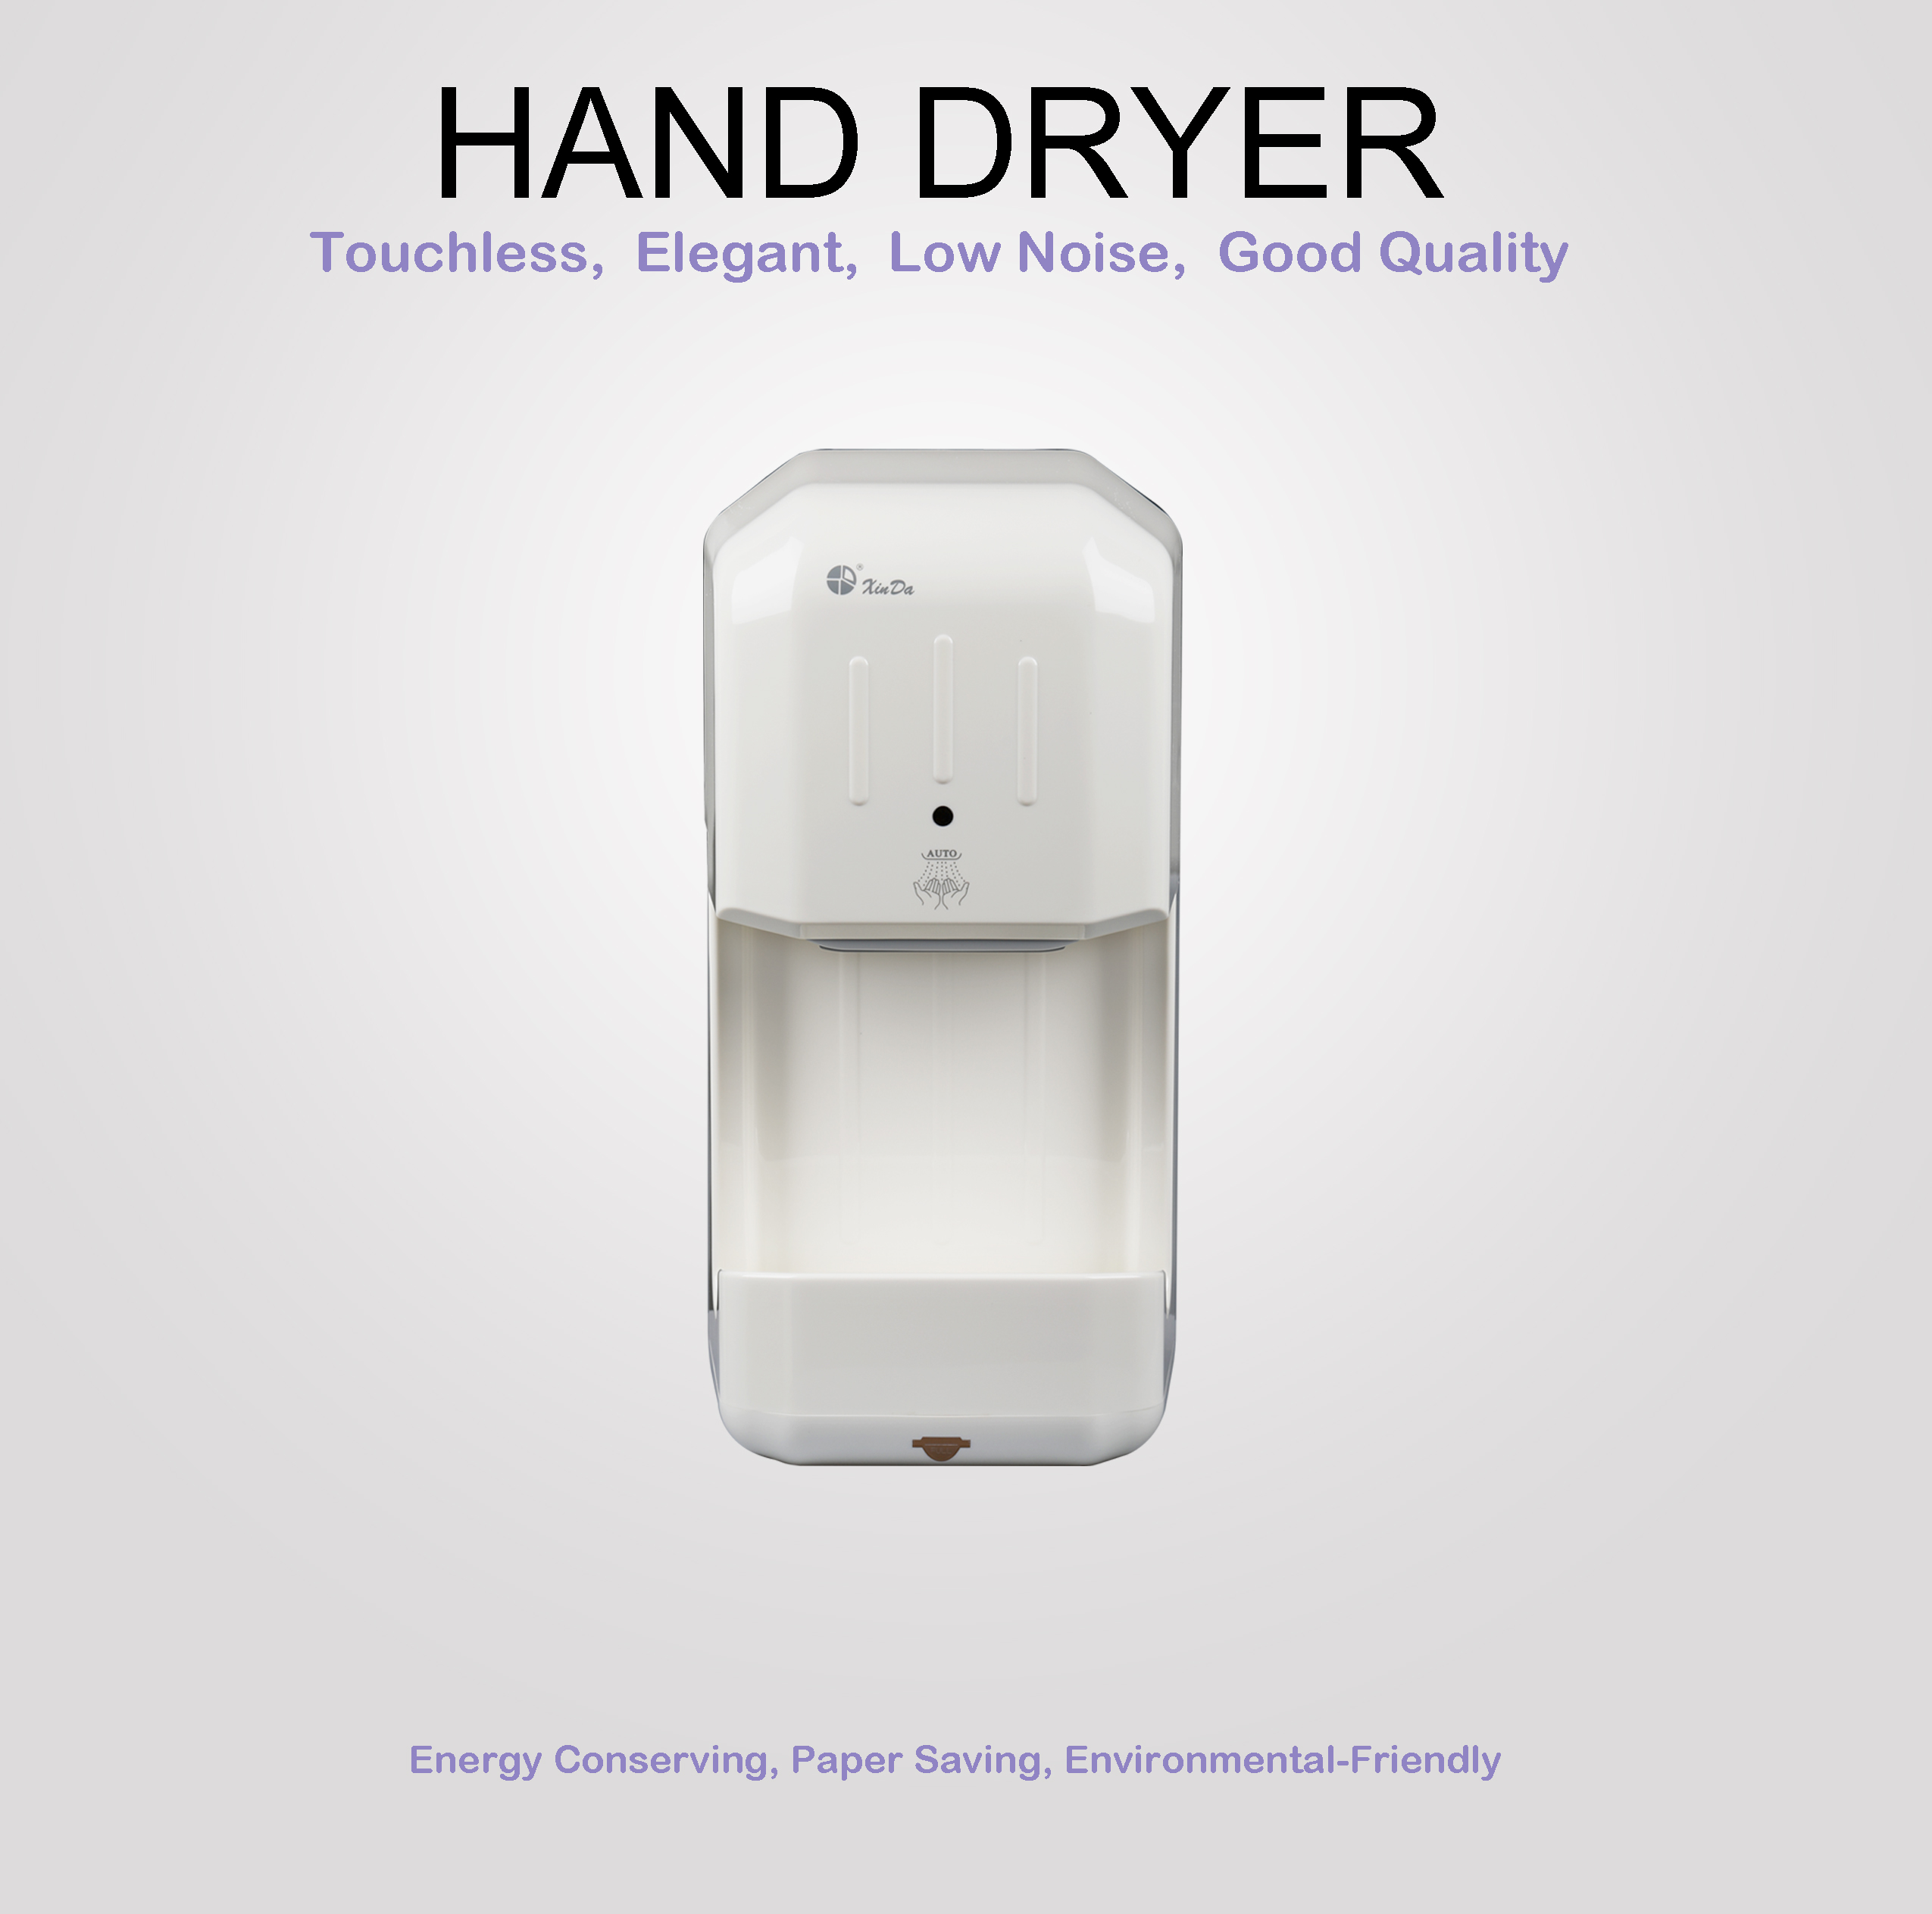 The XinDa GSQ88 Bathroom automatic negative anion air blow hand dryers foot Dryer for commercial washroom with ozone Hand Dryer